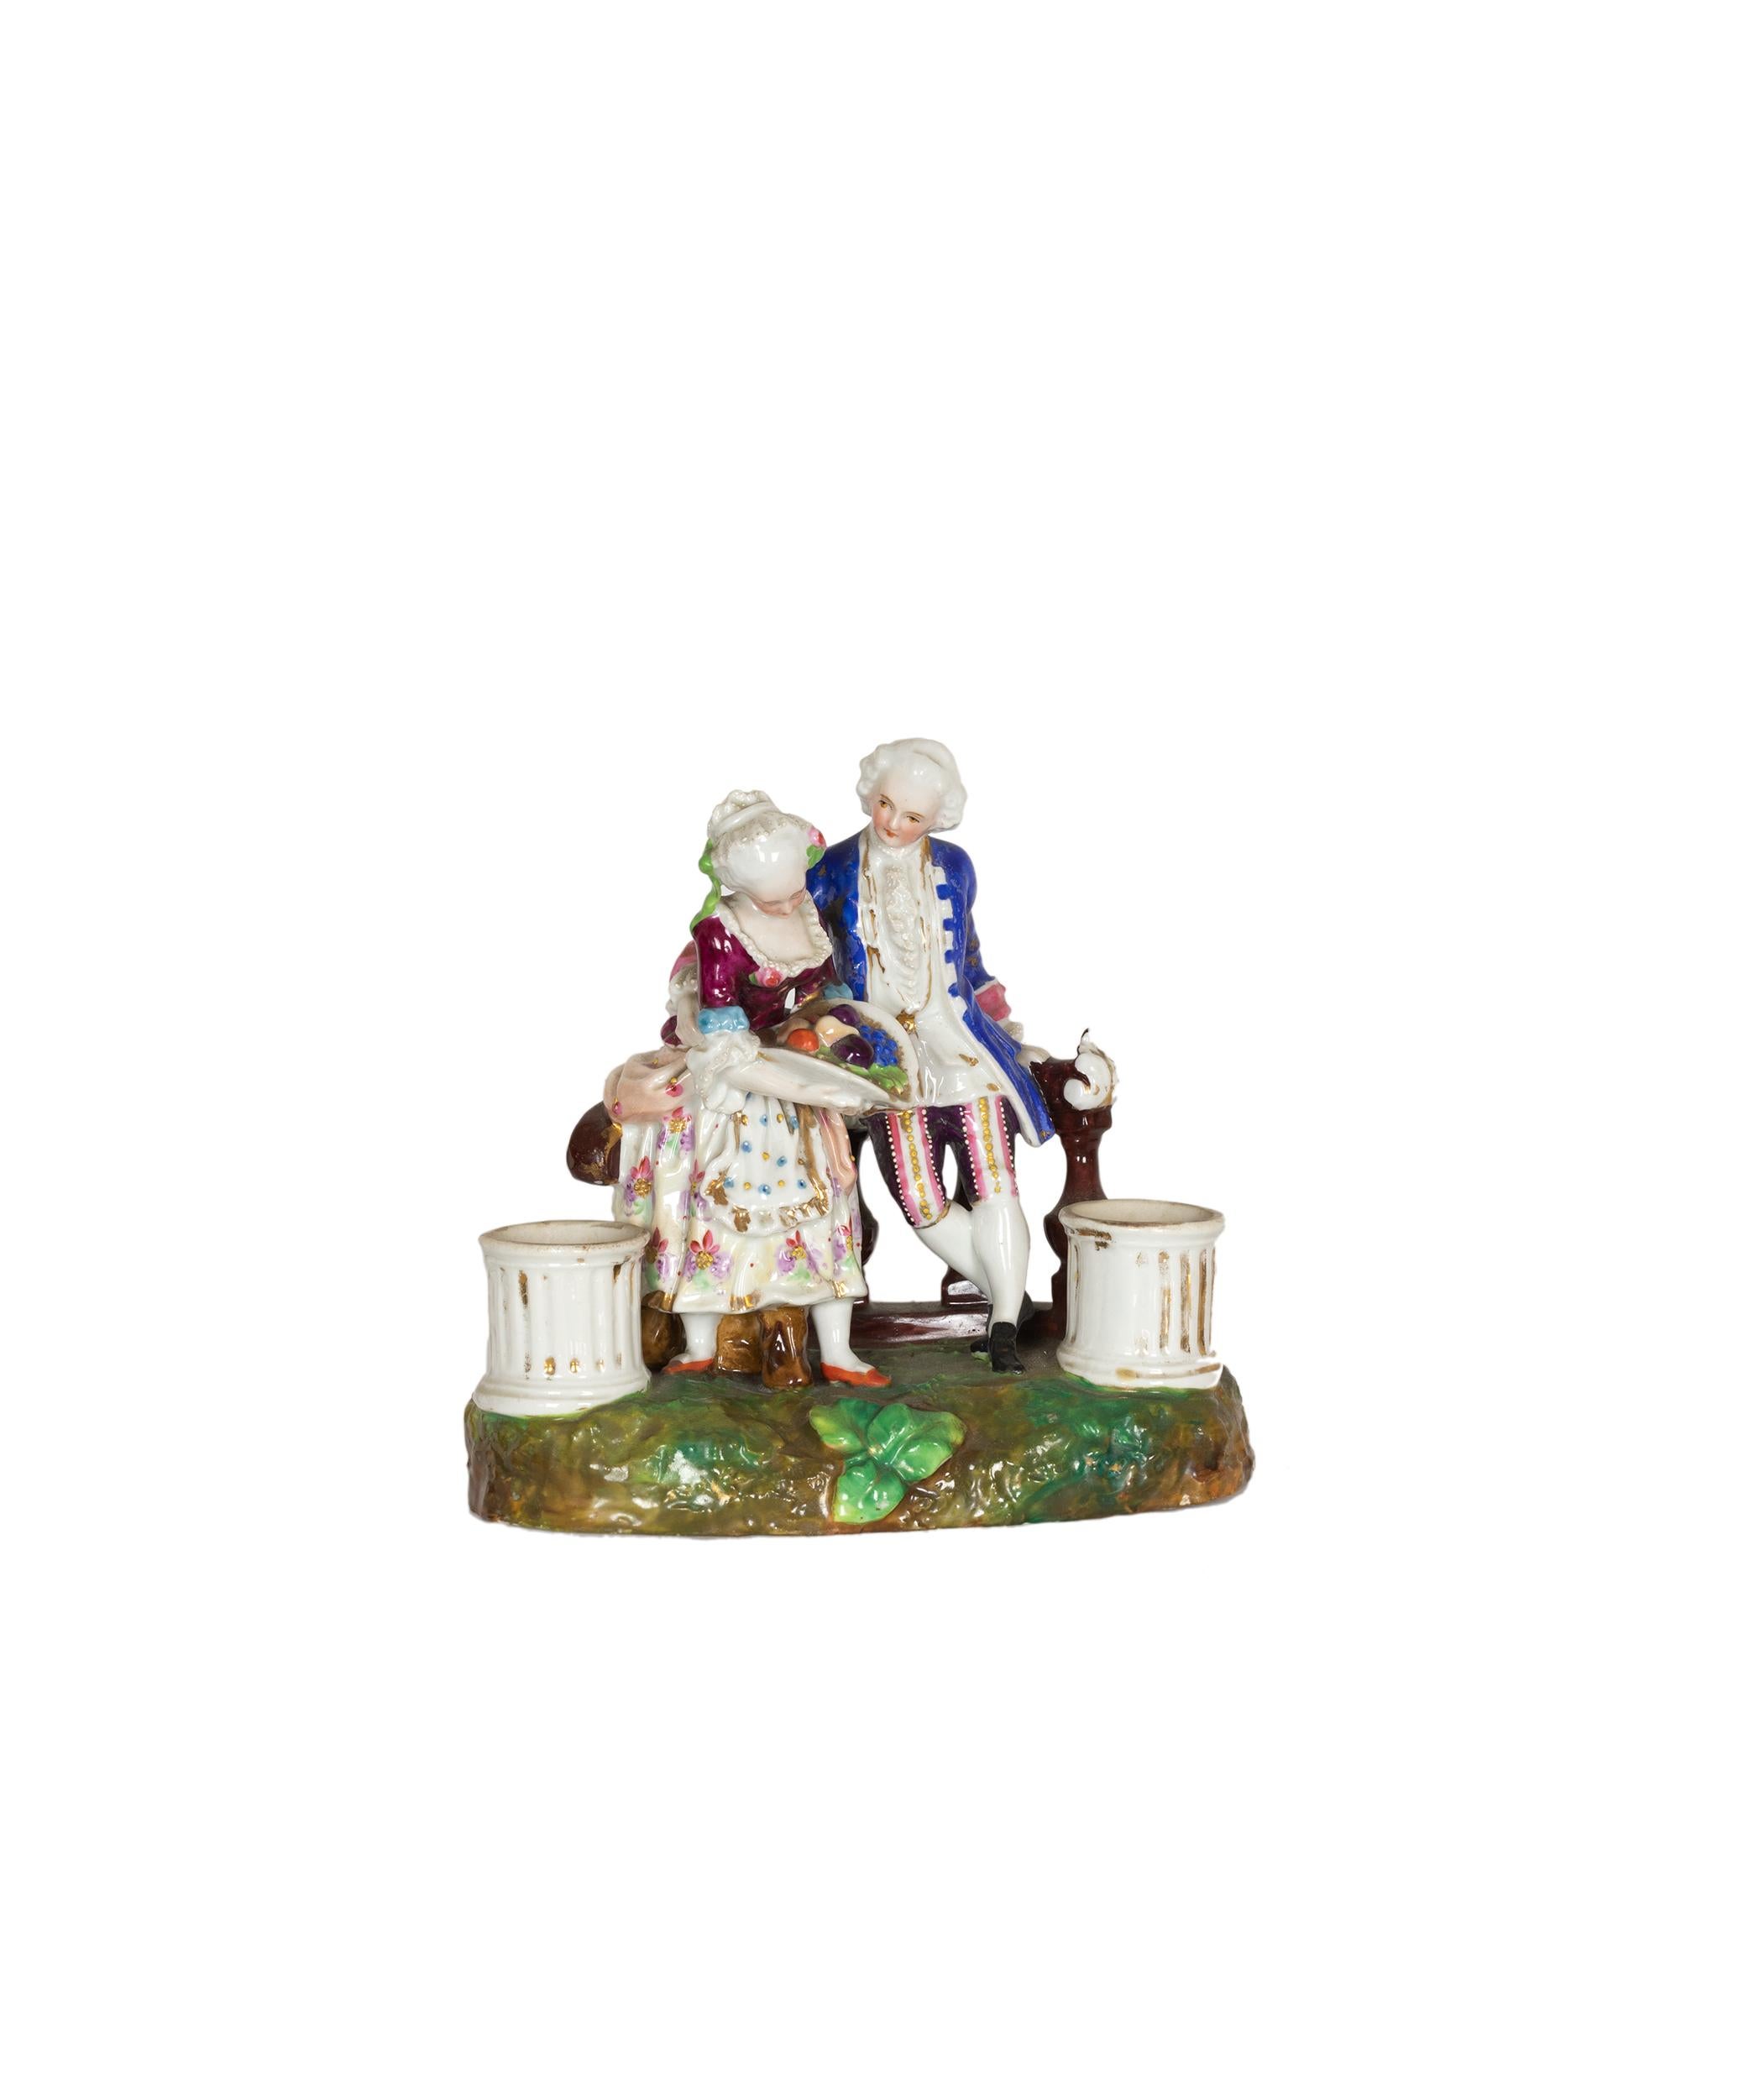 A graceful porcelain inkwell station, crafted from Meissen porcelain, features two inkwell compartments. The piece exhibits excellent condition, consistent with its age and boasts a stunning color palette. The bottom of the inkwell bears the